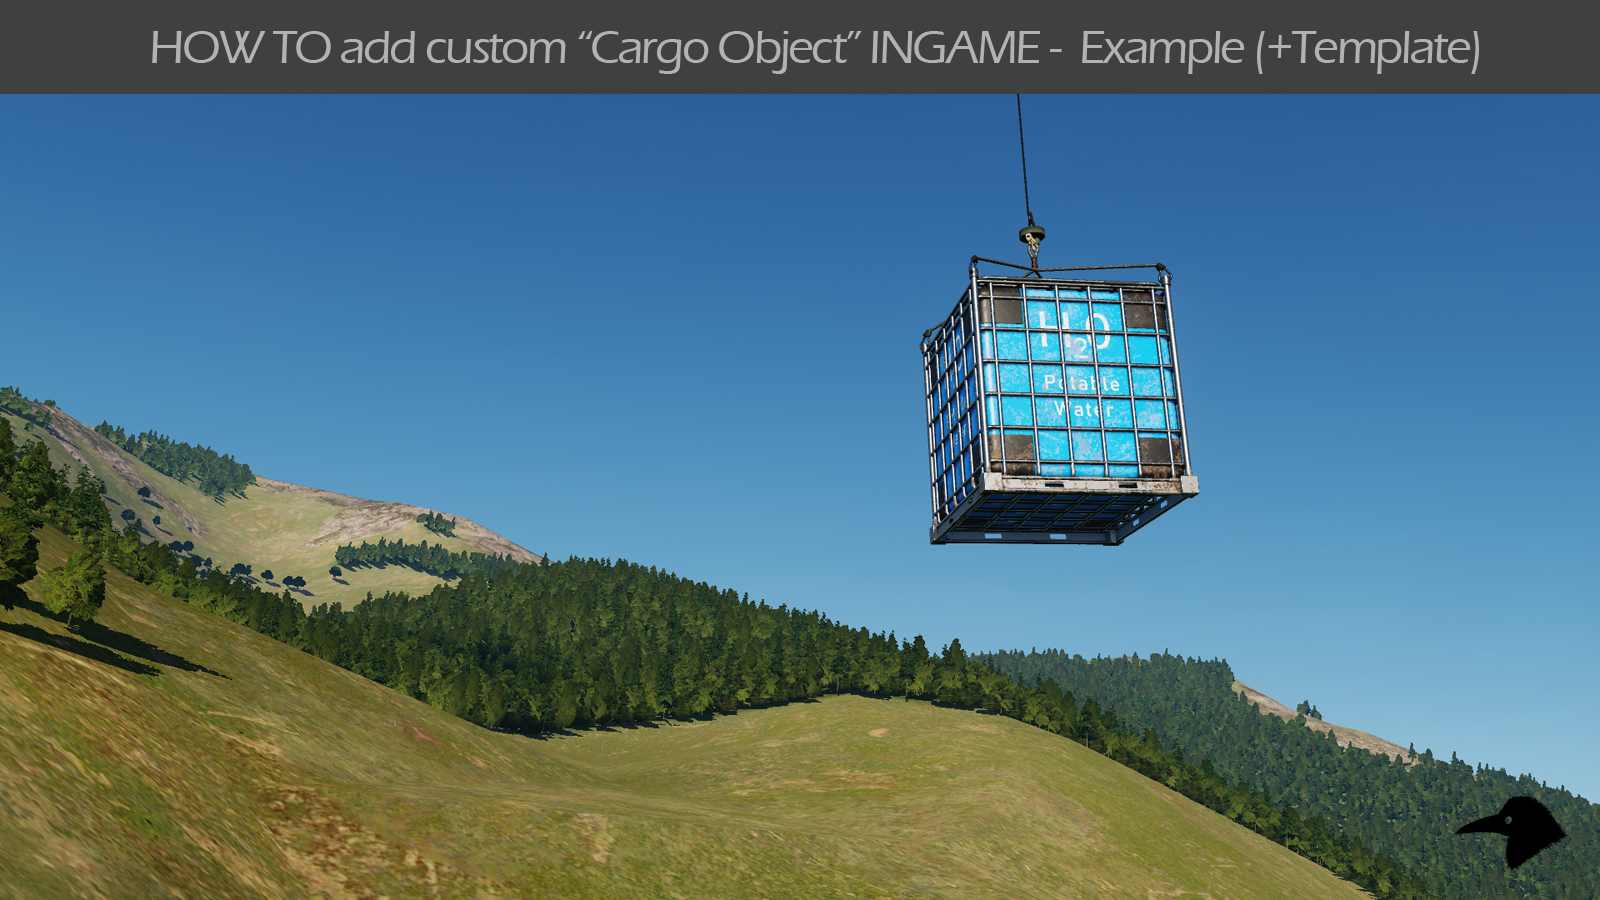 HOW TO add custom "Cargo Object" INGAME Mod + Template